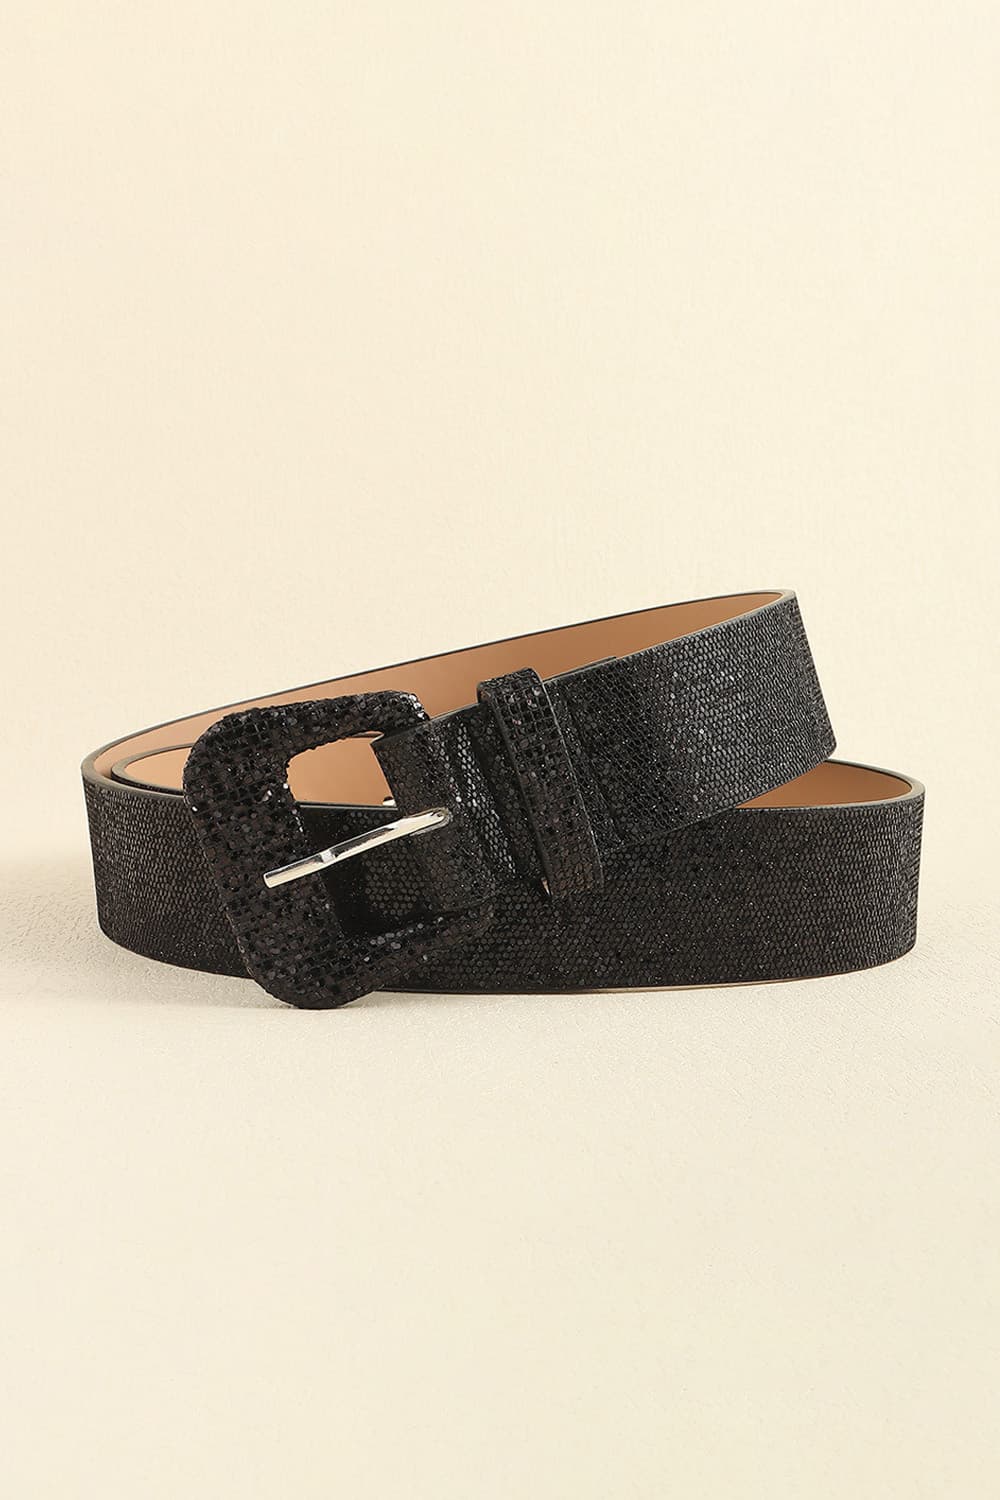 All The Rock Stars 70s Glam PU Leather Glitter Belt in Black, Gold, and Silver